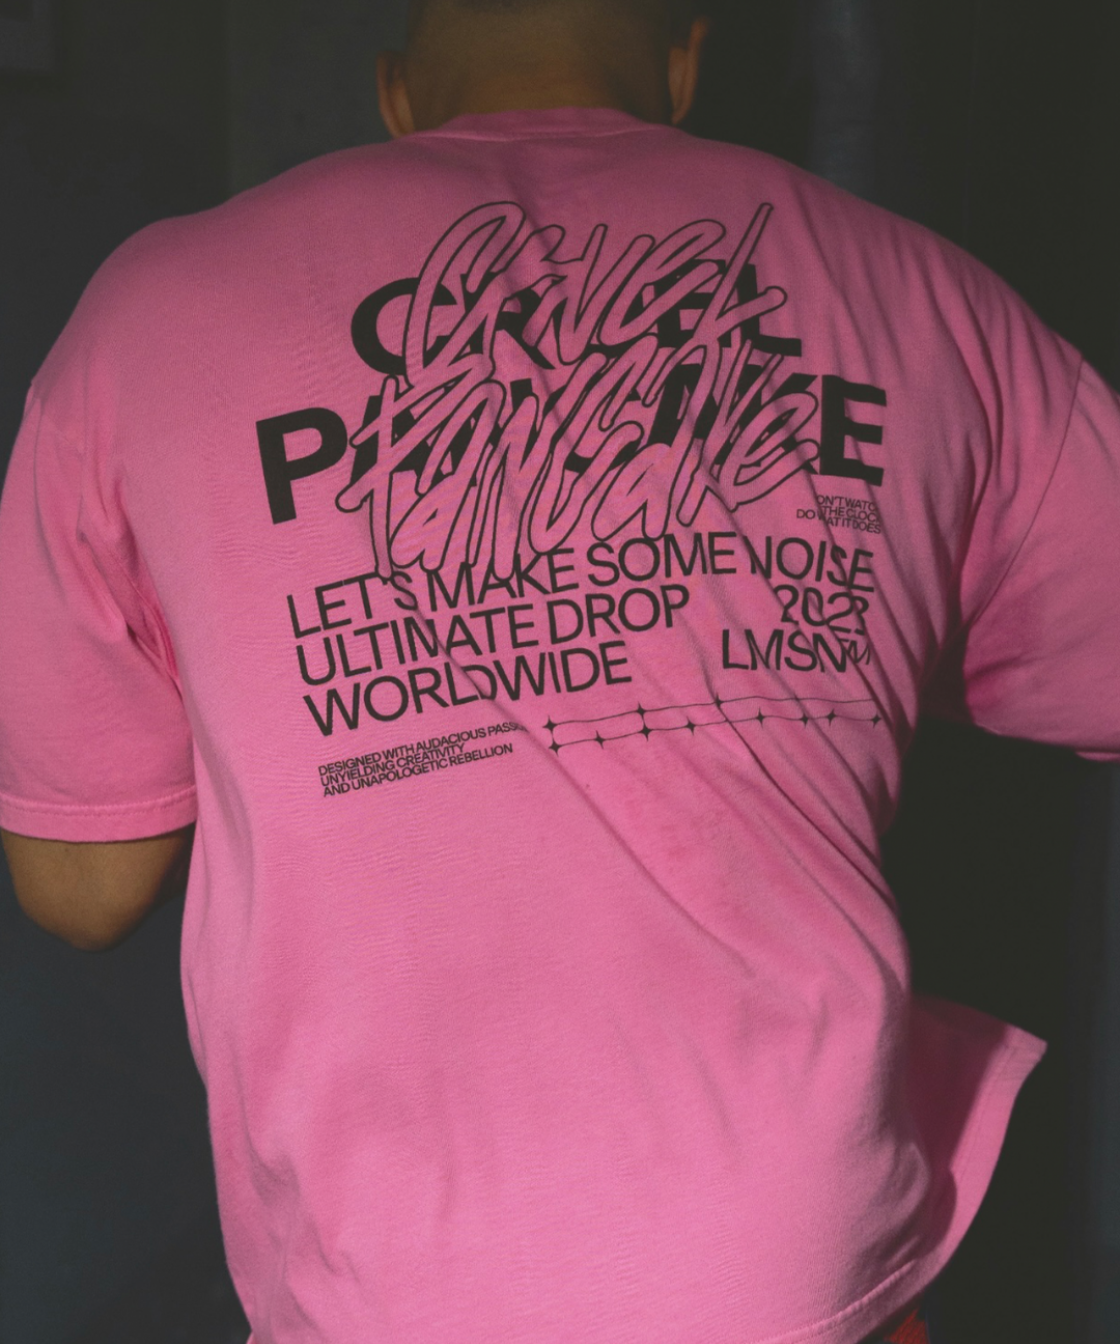 Let's make some noise t-shirt - pink fade out